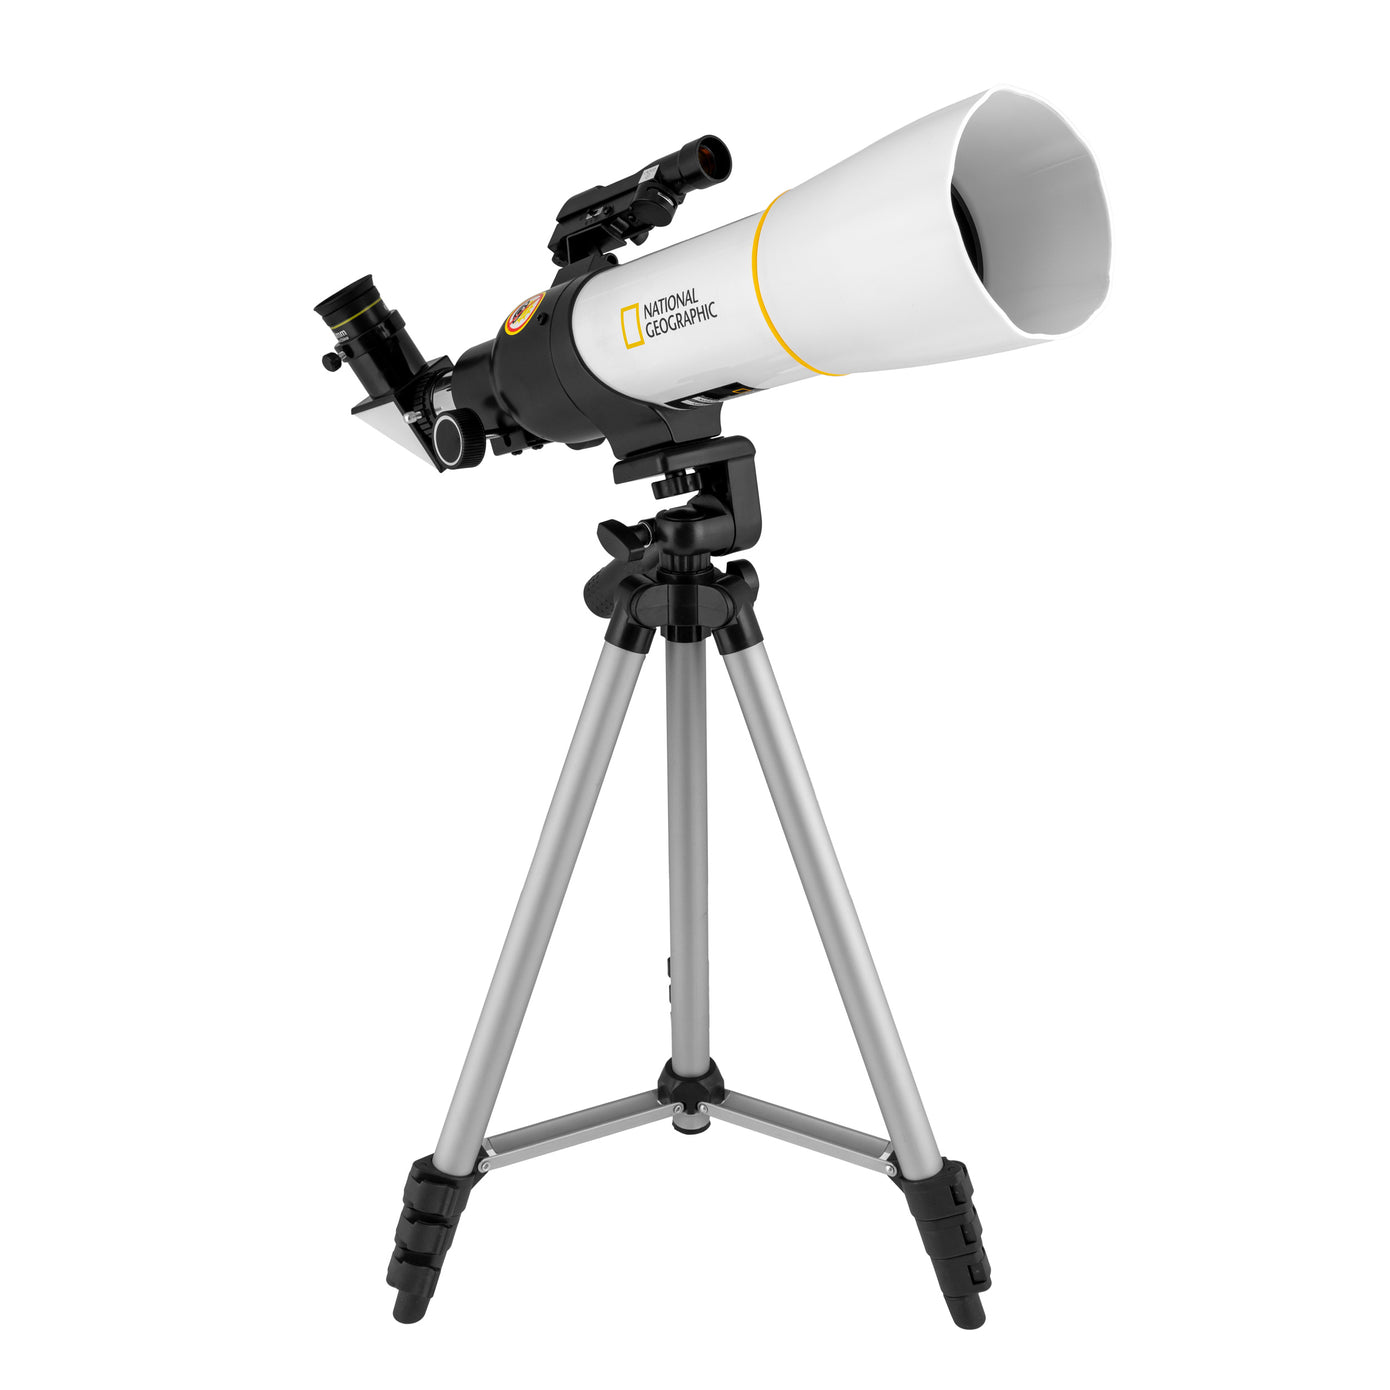 National Geographic 70mm Refractor